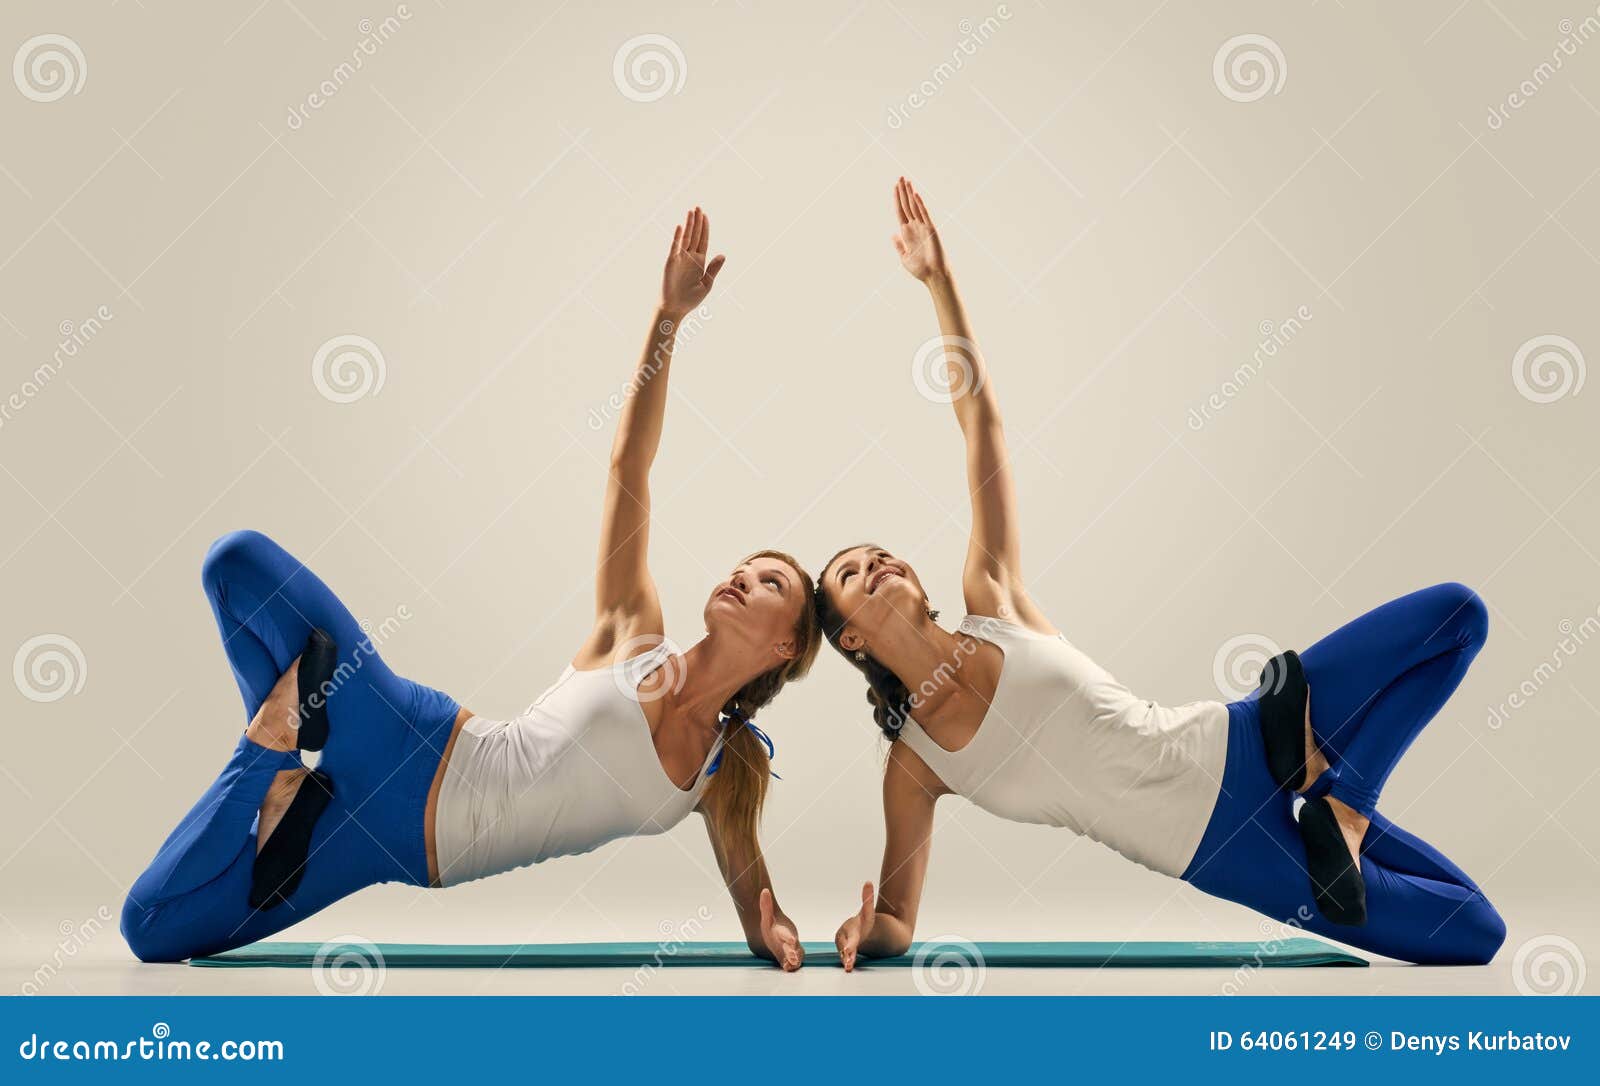 6 Effective Acro Yoga Poses For A Healthy Body, duo yoga poses -  sxsmkt.com.br